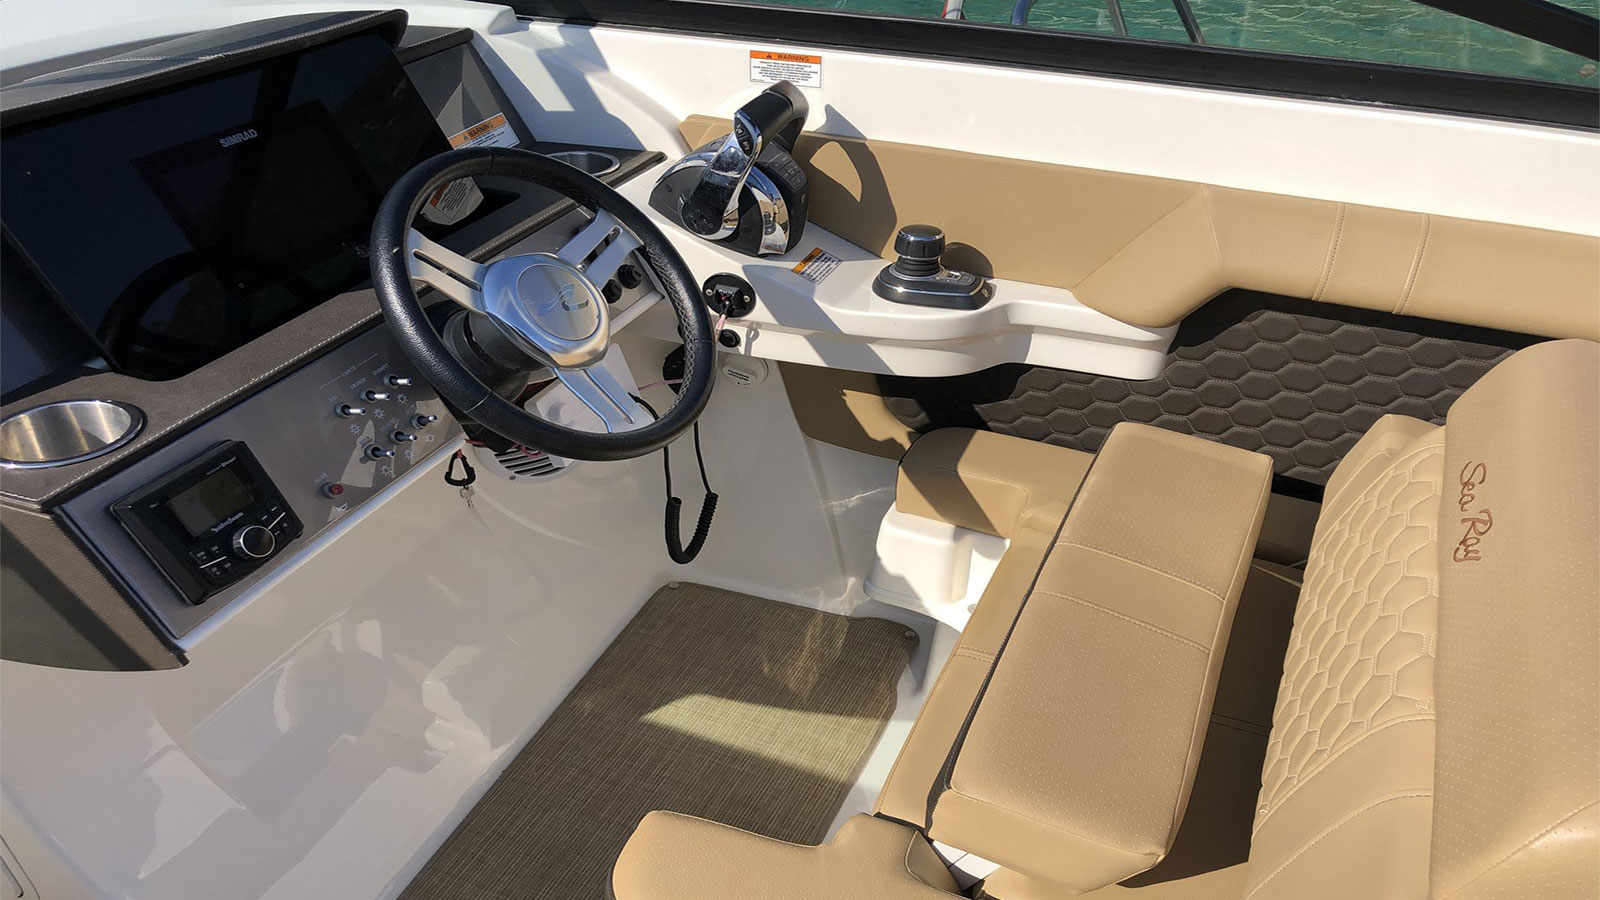 2018 Sea Ray SDX 290, Used Sea Ray SDX 290 Yacht For Sale, Motor yacht Sea Ray SDX 290, Sea Ray SDX 290, Sea Ray, Sea Ray SDX 290 for sale, Sea Ray yachts, Sea Ray for sale, Sea Ray SDX 290 yachts, buy Sea Ray SDX 290, 2018 Sea Ray SDX 290 boat, Sea Ray turkey, Sea Ray yacht sales, Sea Ray motoryacht, perfomax, perfomax marine, ete yachting for sale, Sea Ray SDX290, Sea Ray SDX290 Boat, yacht brokerage, yacht sales, turkey broker, turkey brokerage, preowned Sea Ray, secondhand Sea Ray